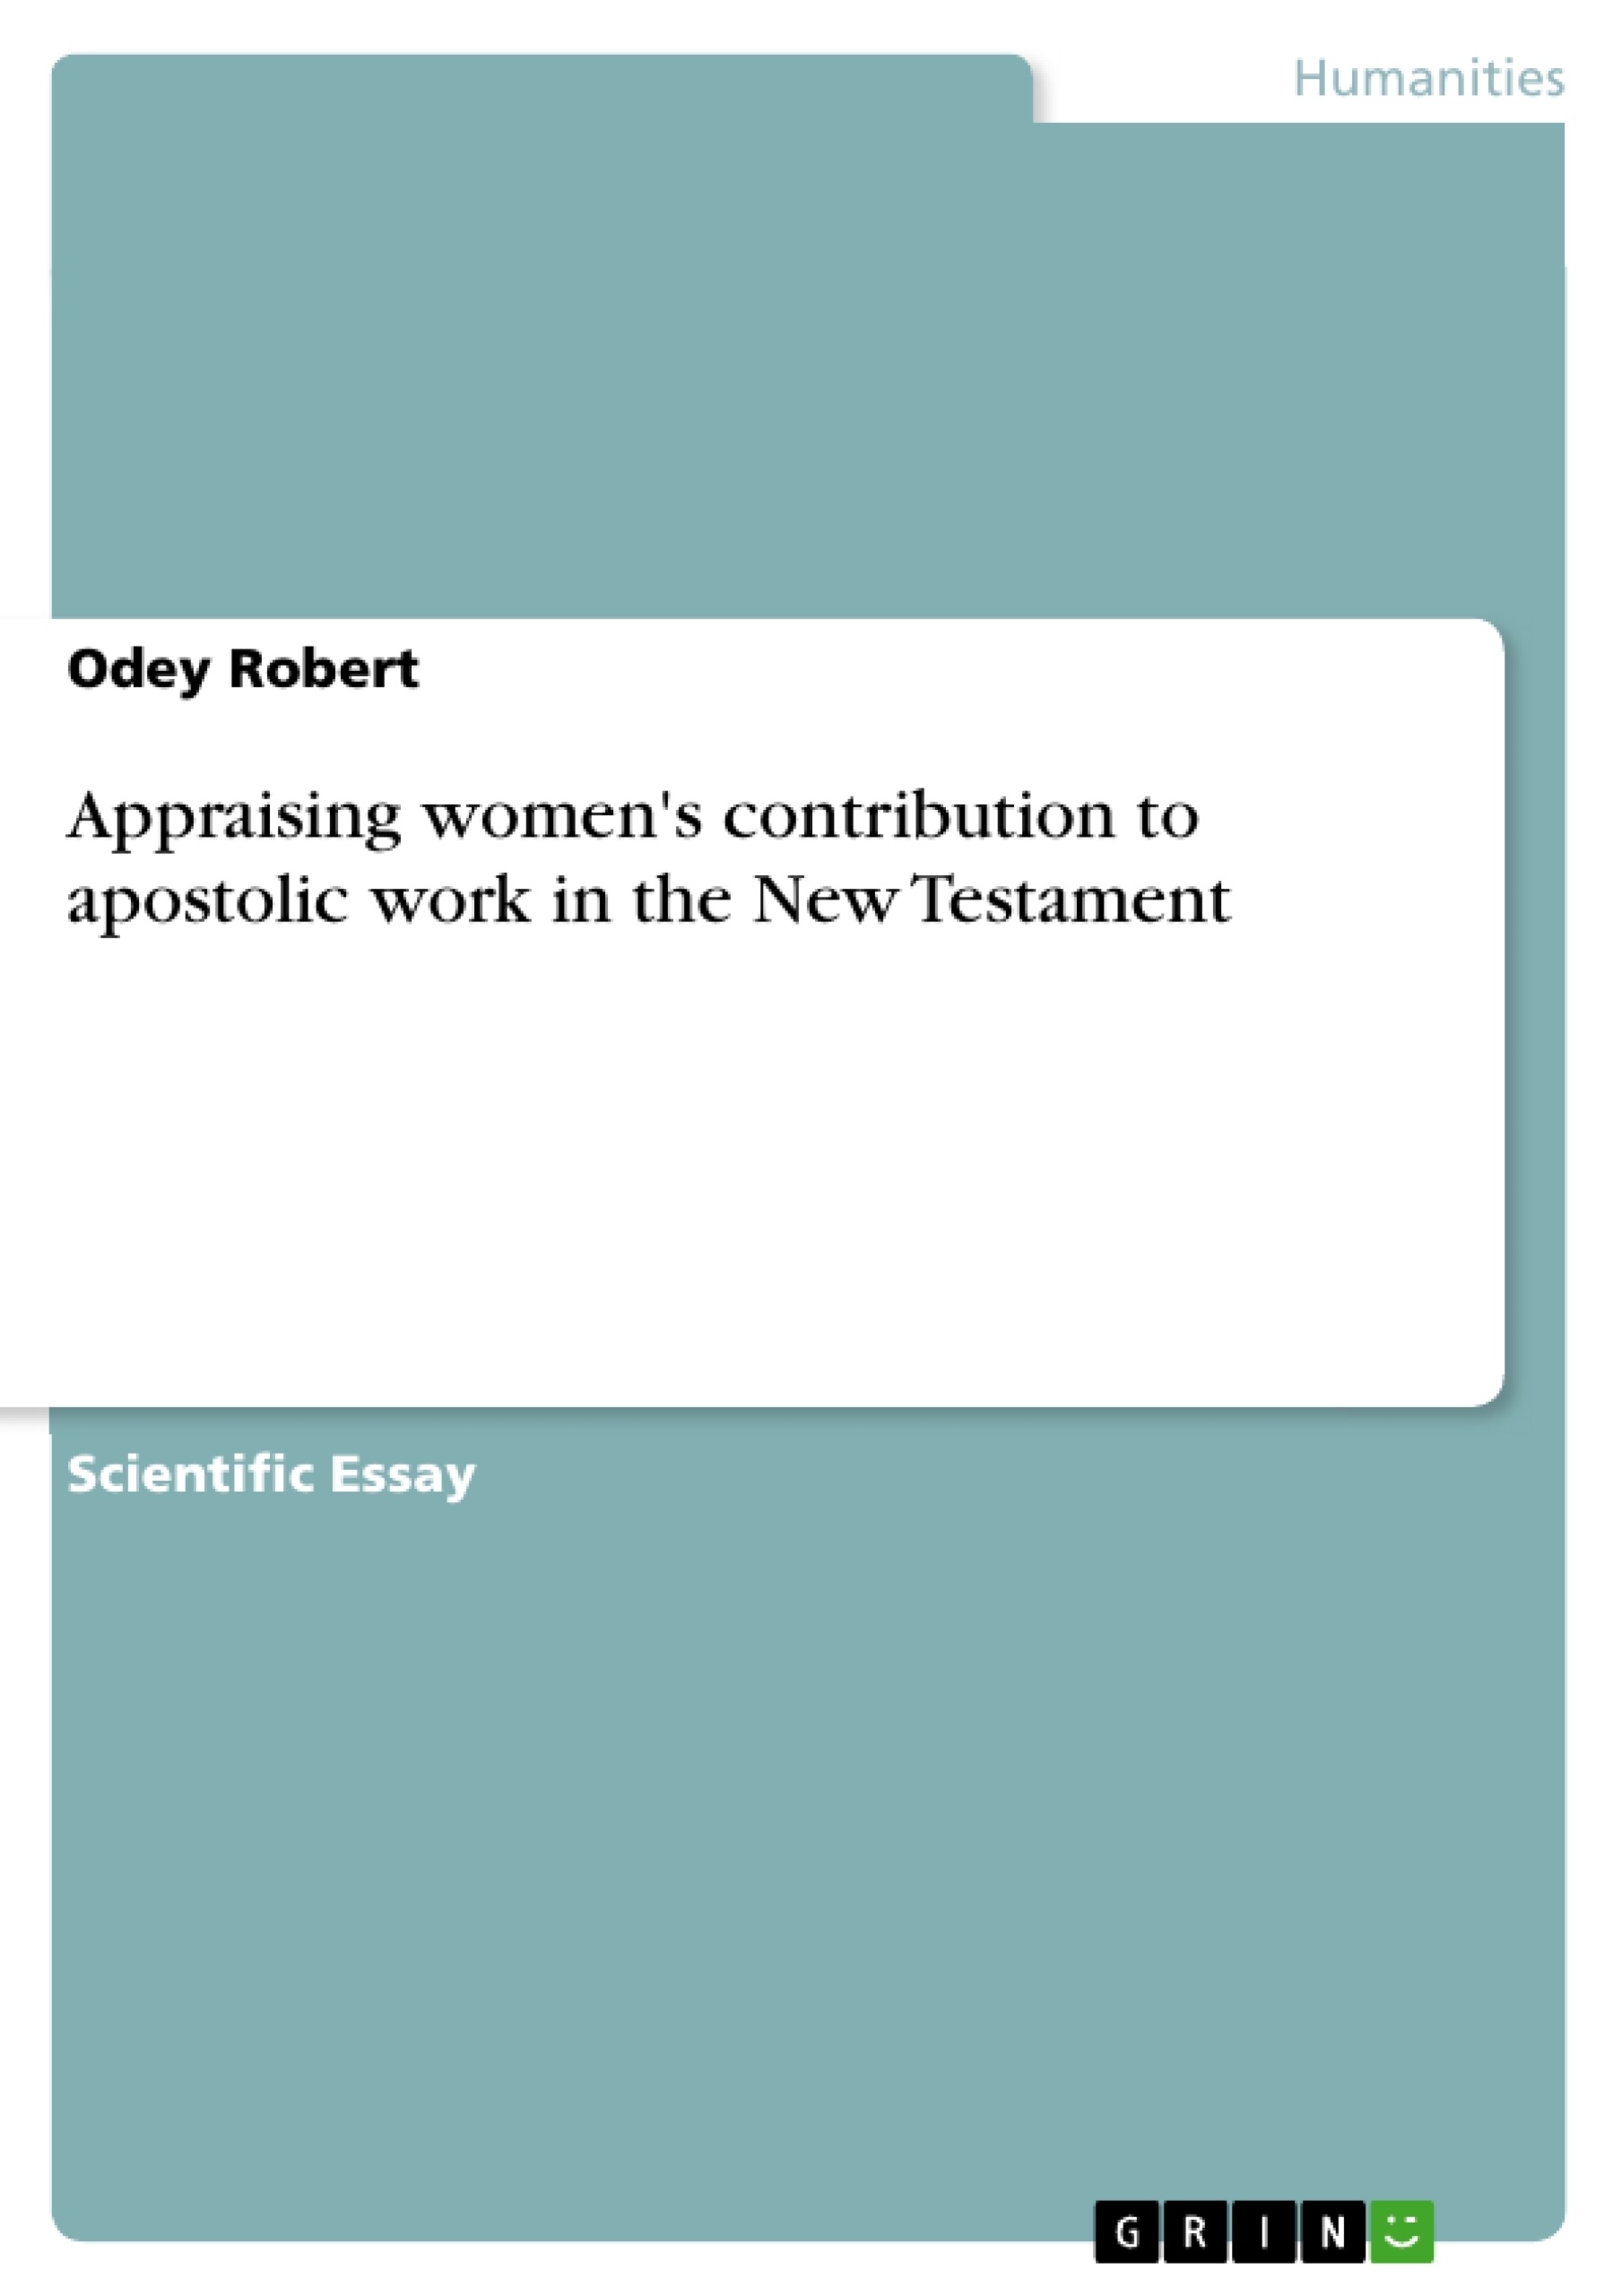 Title: Appraising women's contribution to apostolic work in the New Testament